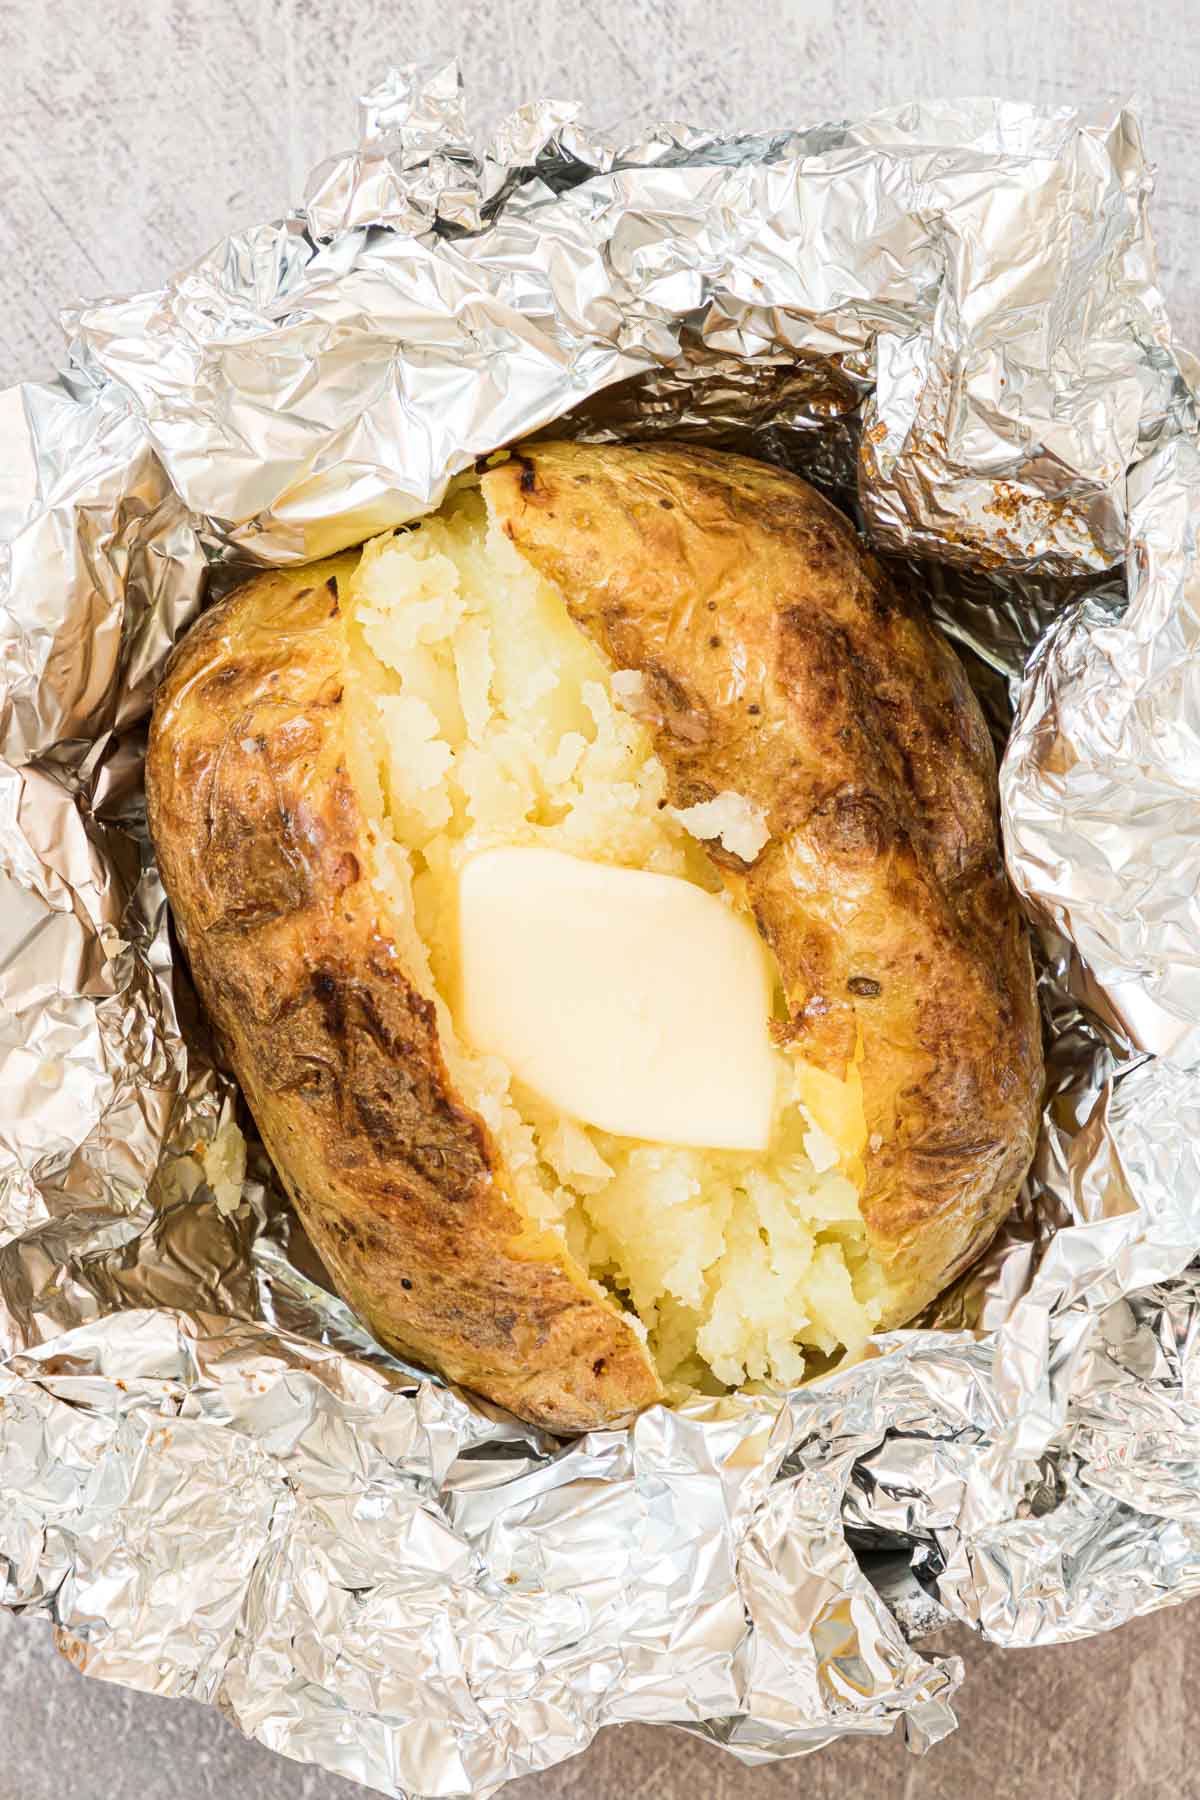 top down view of a cooked baked potato on the grill cut open and topped with butter